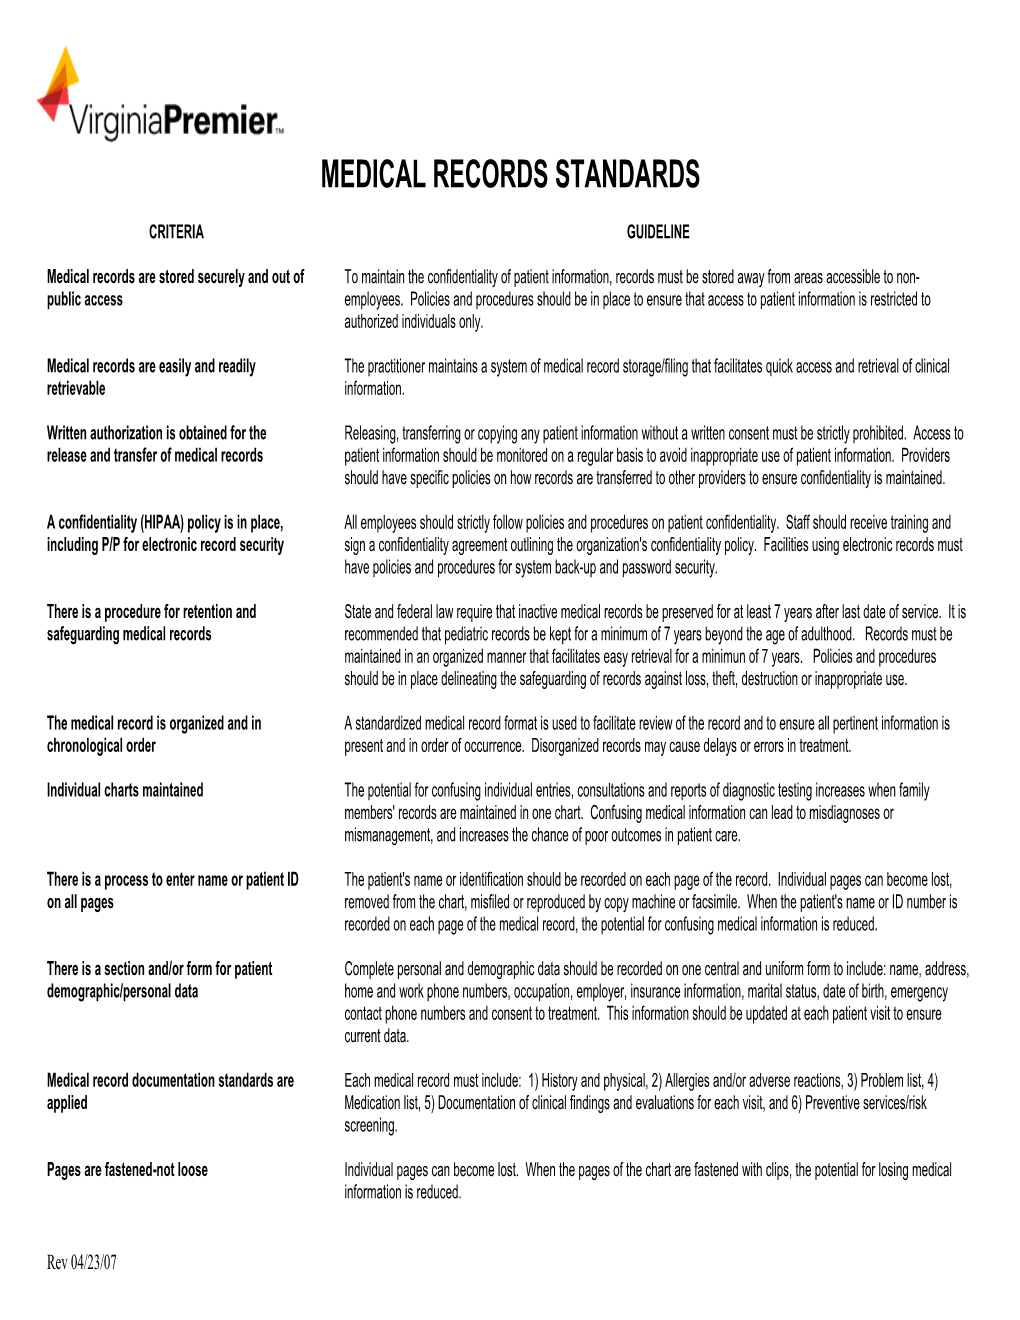 Medical Record Standards